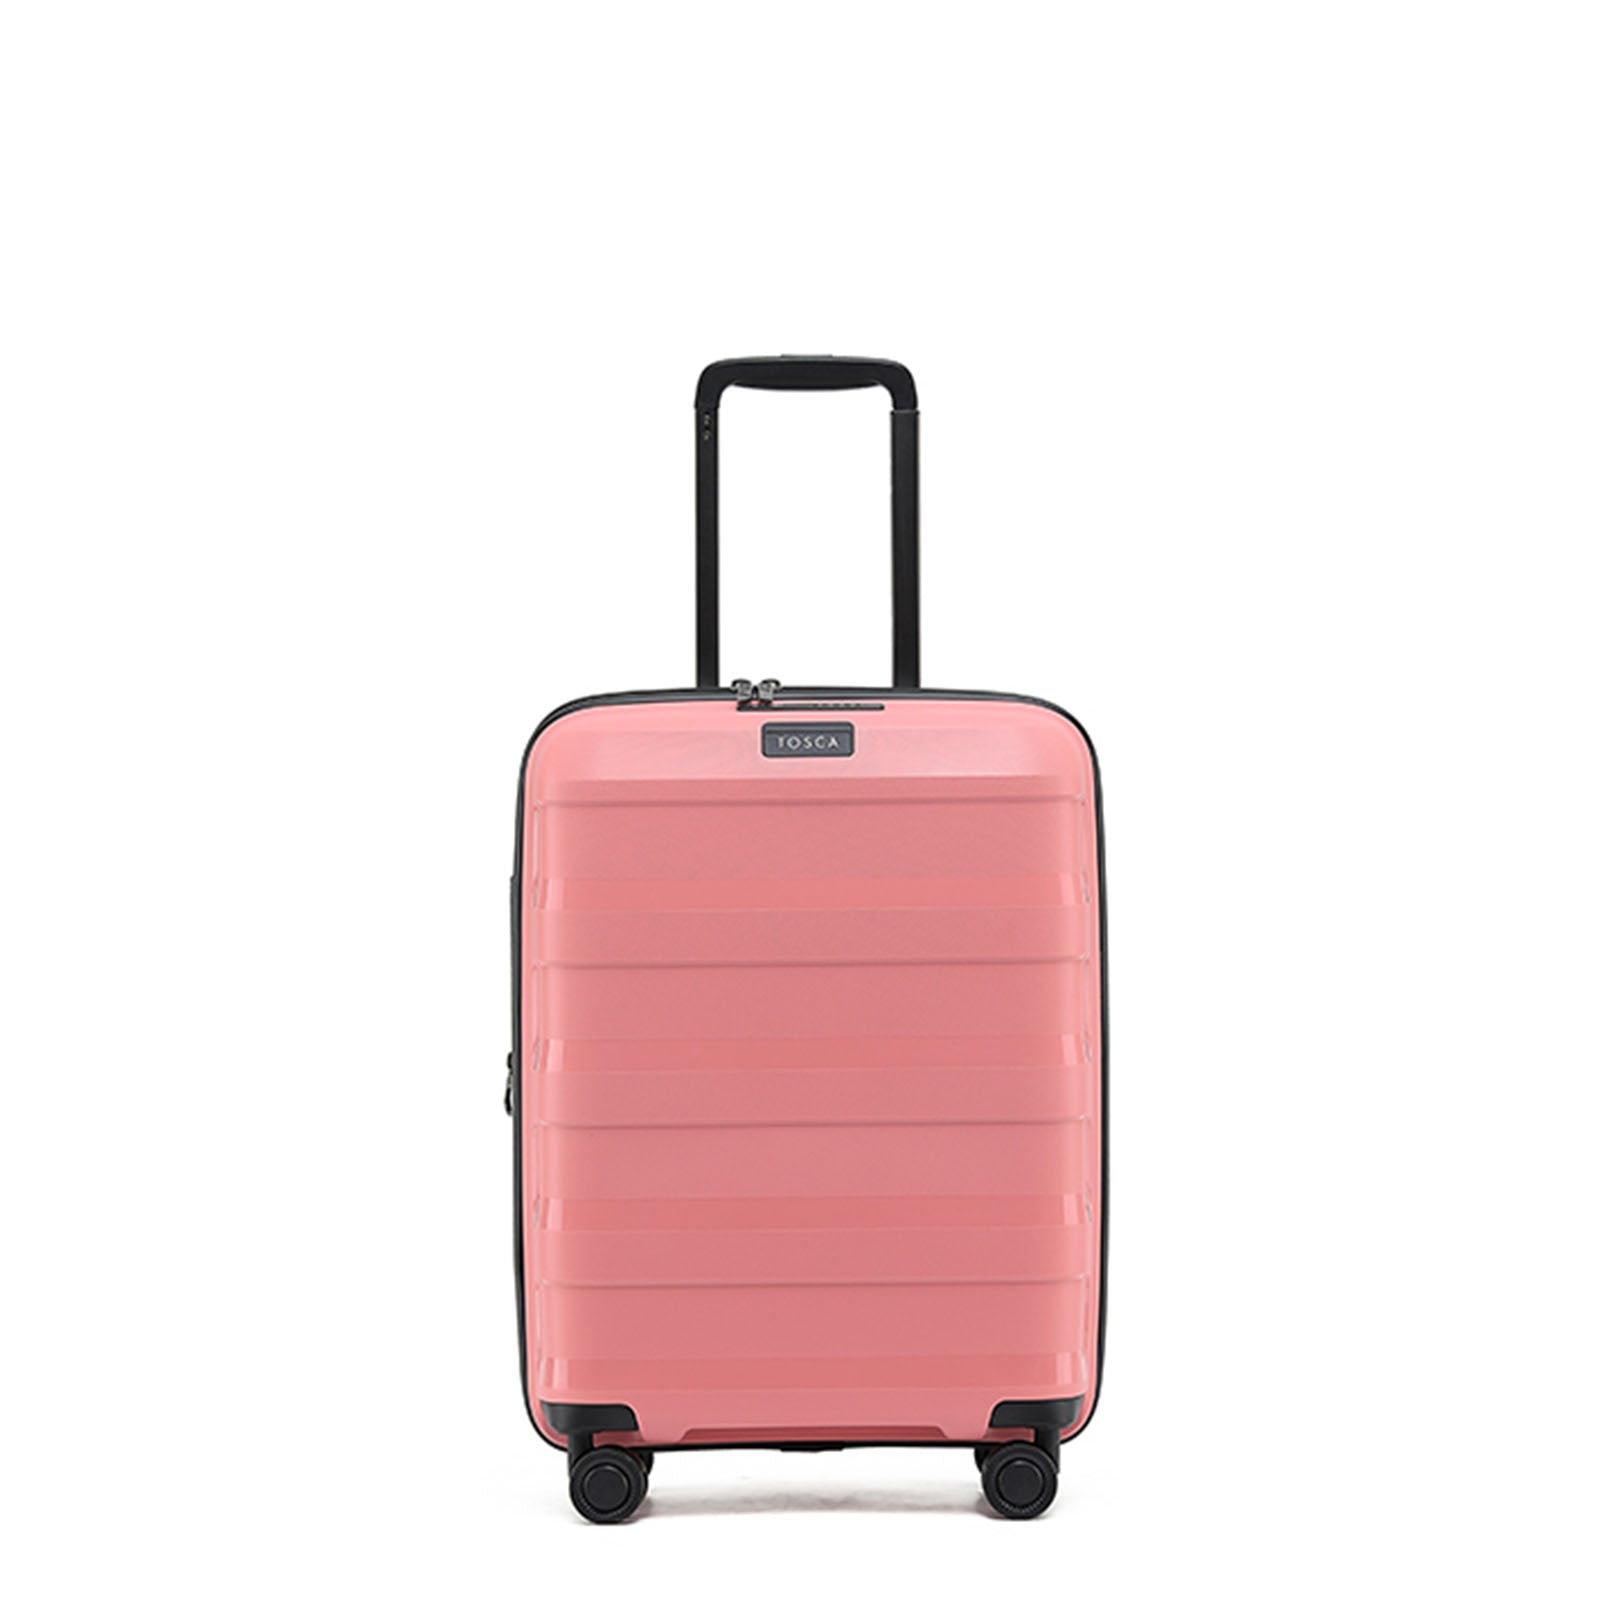 Tosca Comet 4 Wheel 55cm Carry-On Suitcase Coral